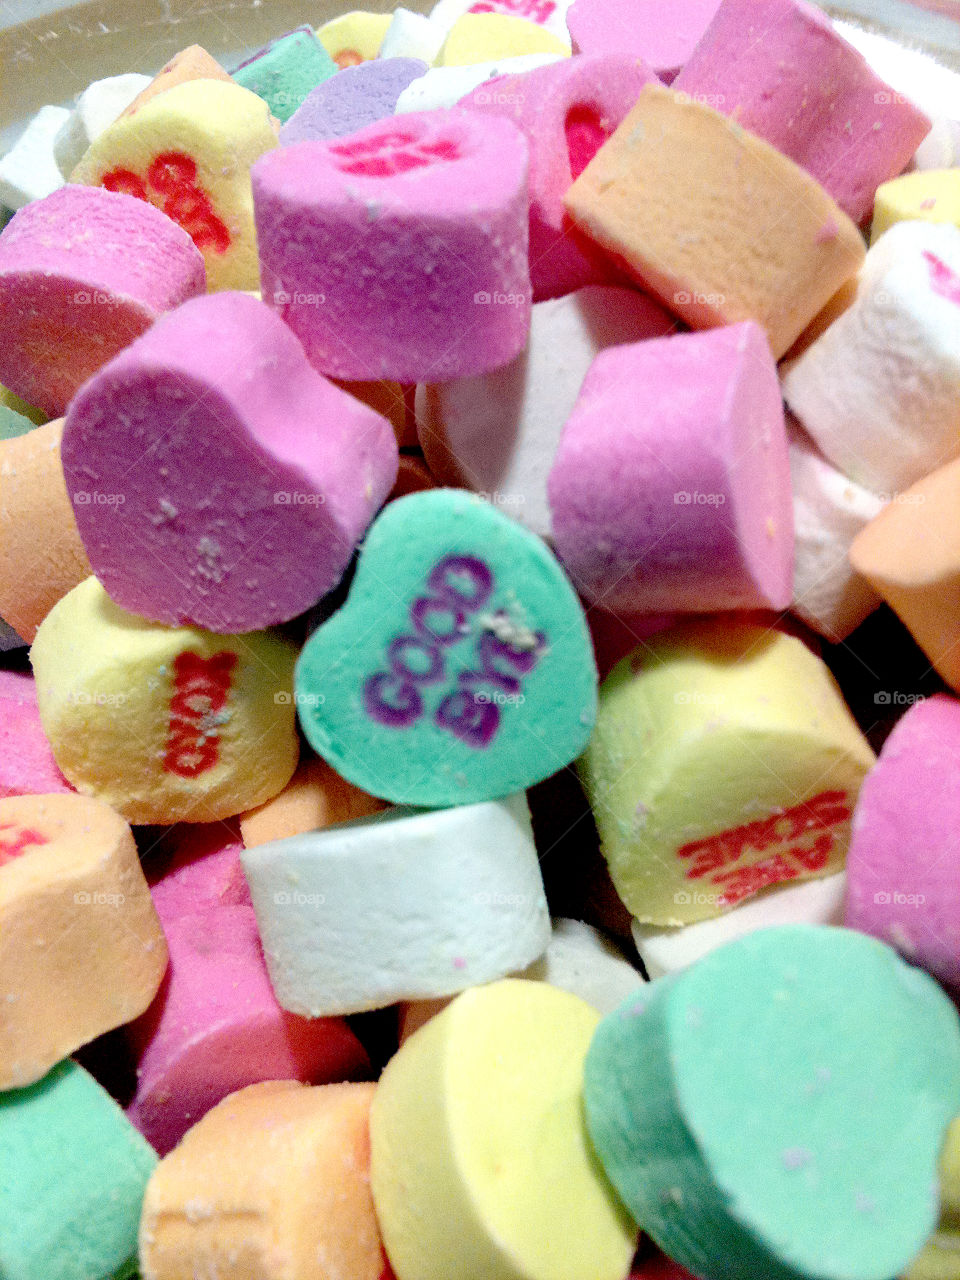 Goodbye. Good Bye conversation candy heart in dish.